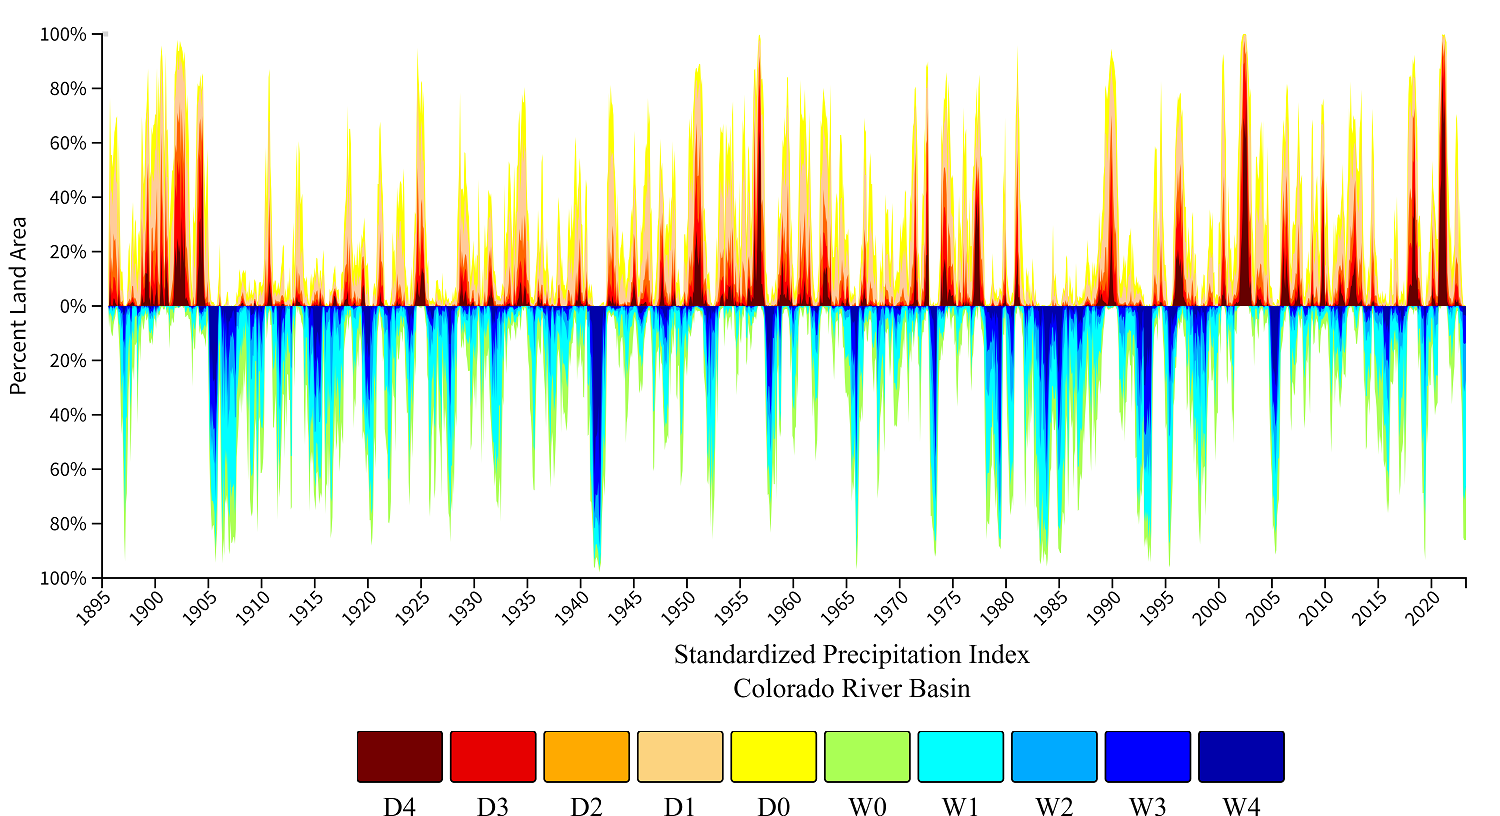 Annual drought and precipitation conditions from 1895 to 2023 on the Colorado River presented on a spike chart with red and blue tones